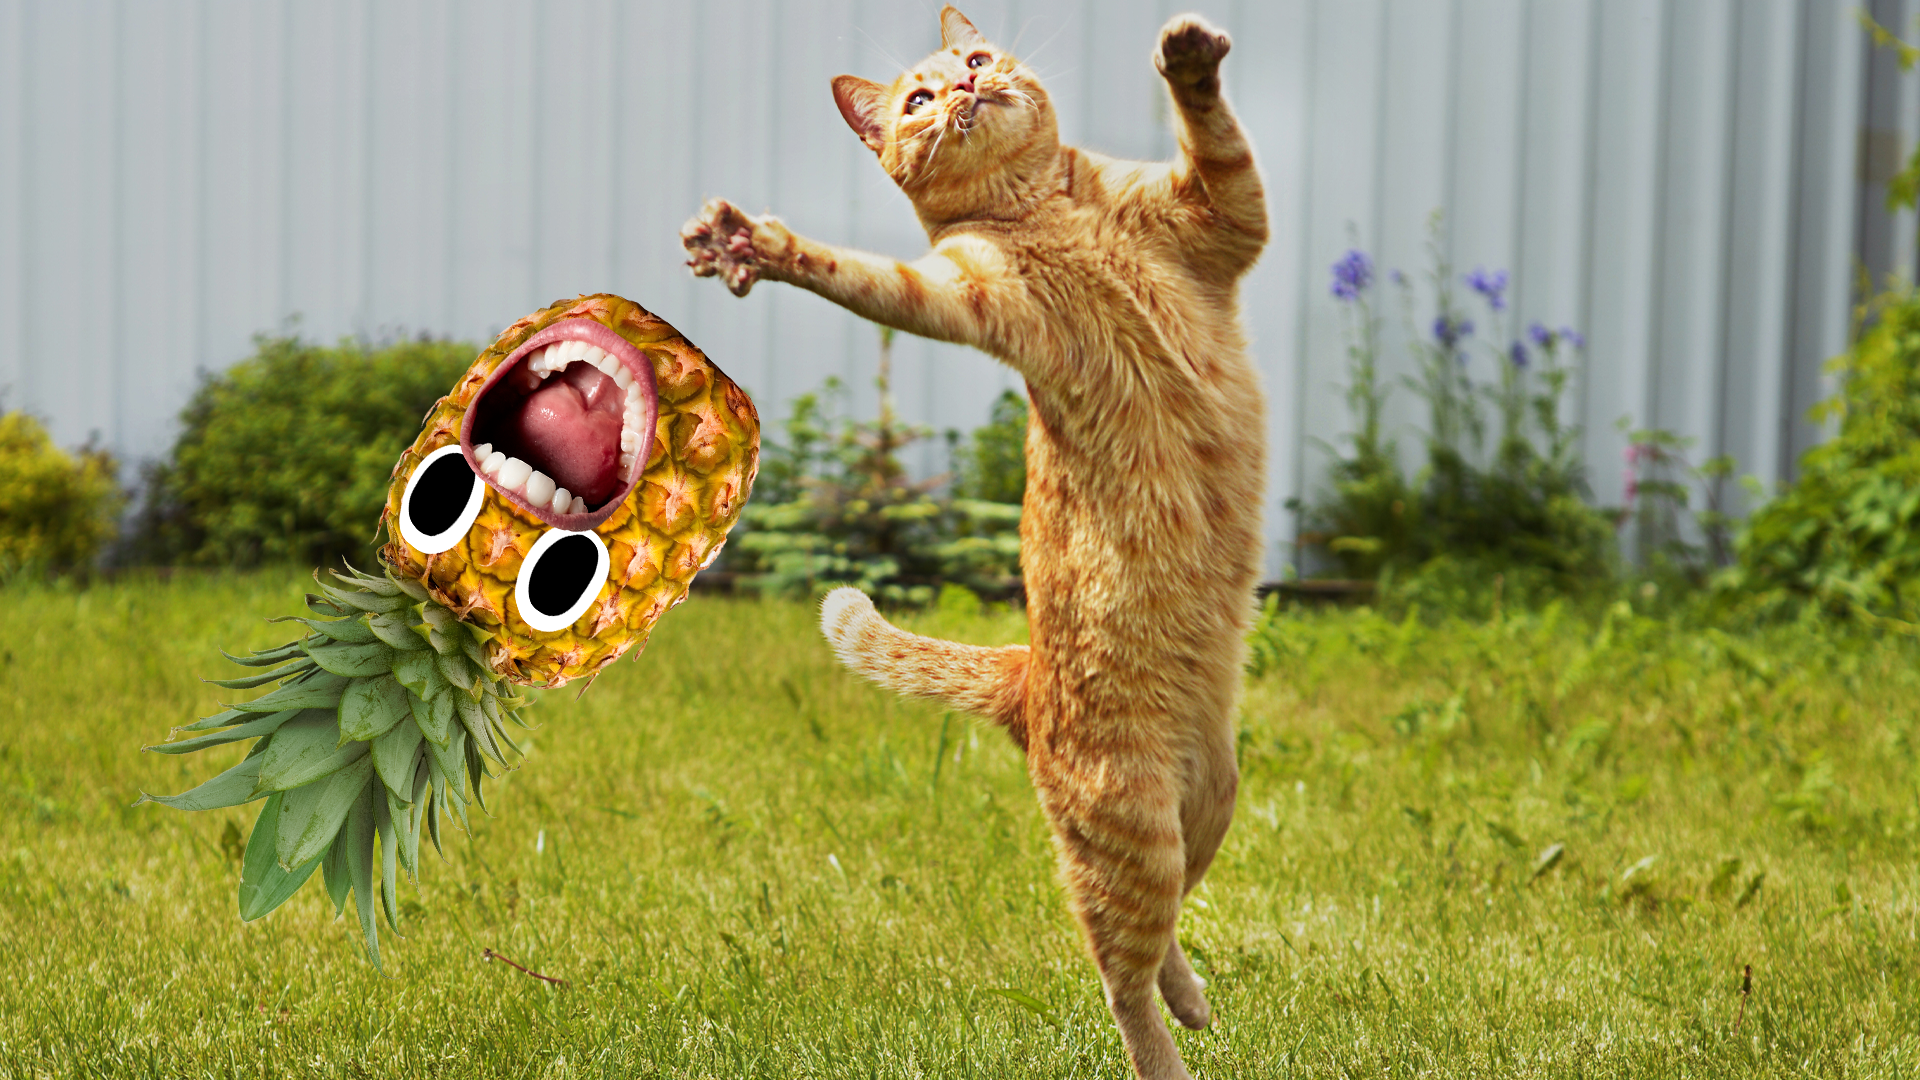 A cat leaps to stop a flying pineapple